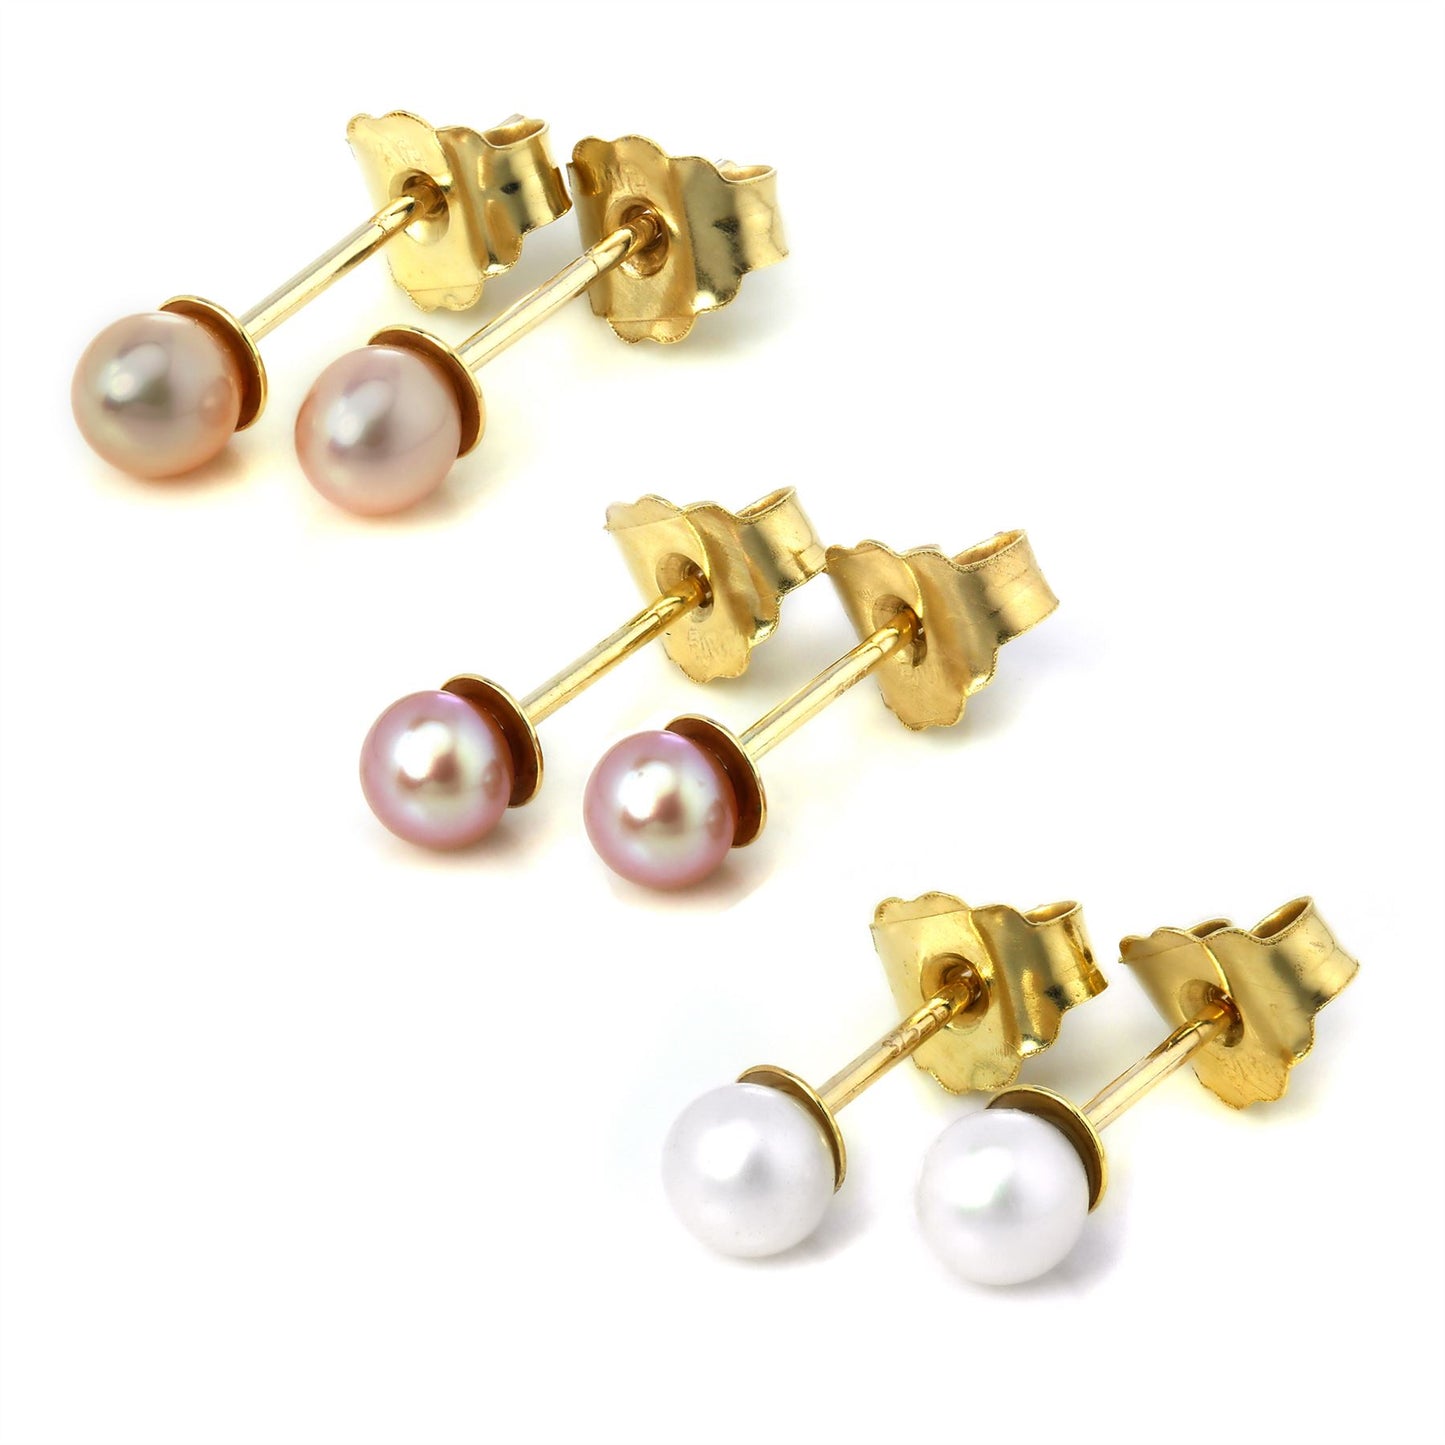 9ct Gold Small 3mm Freshwater Pearl Stud Earrings